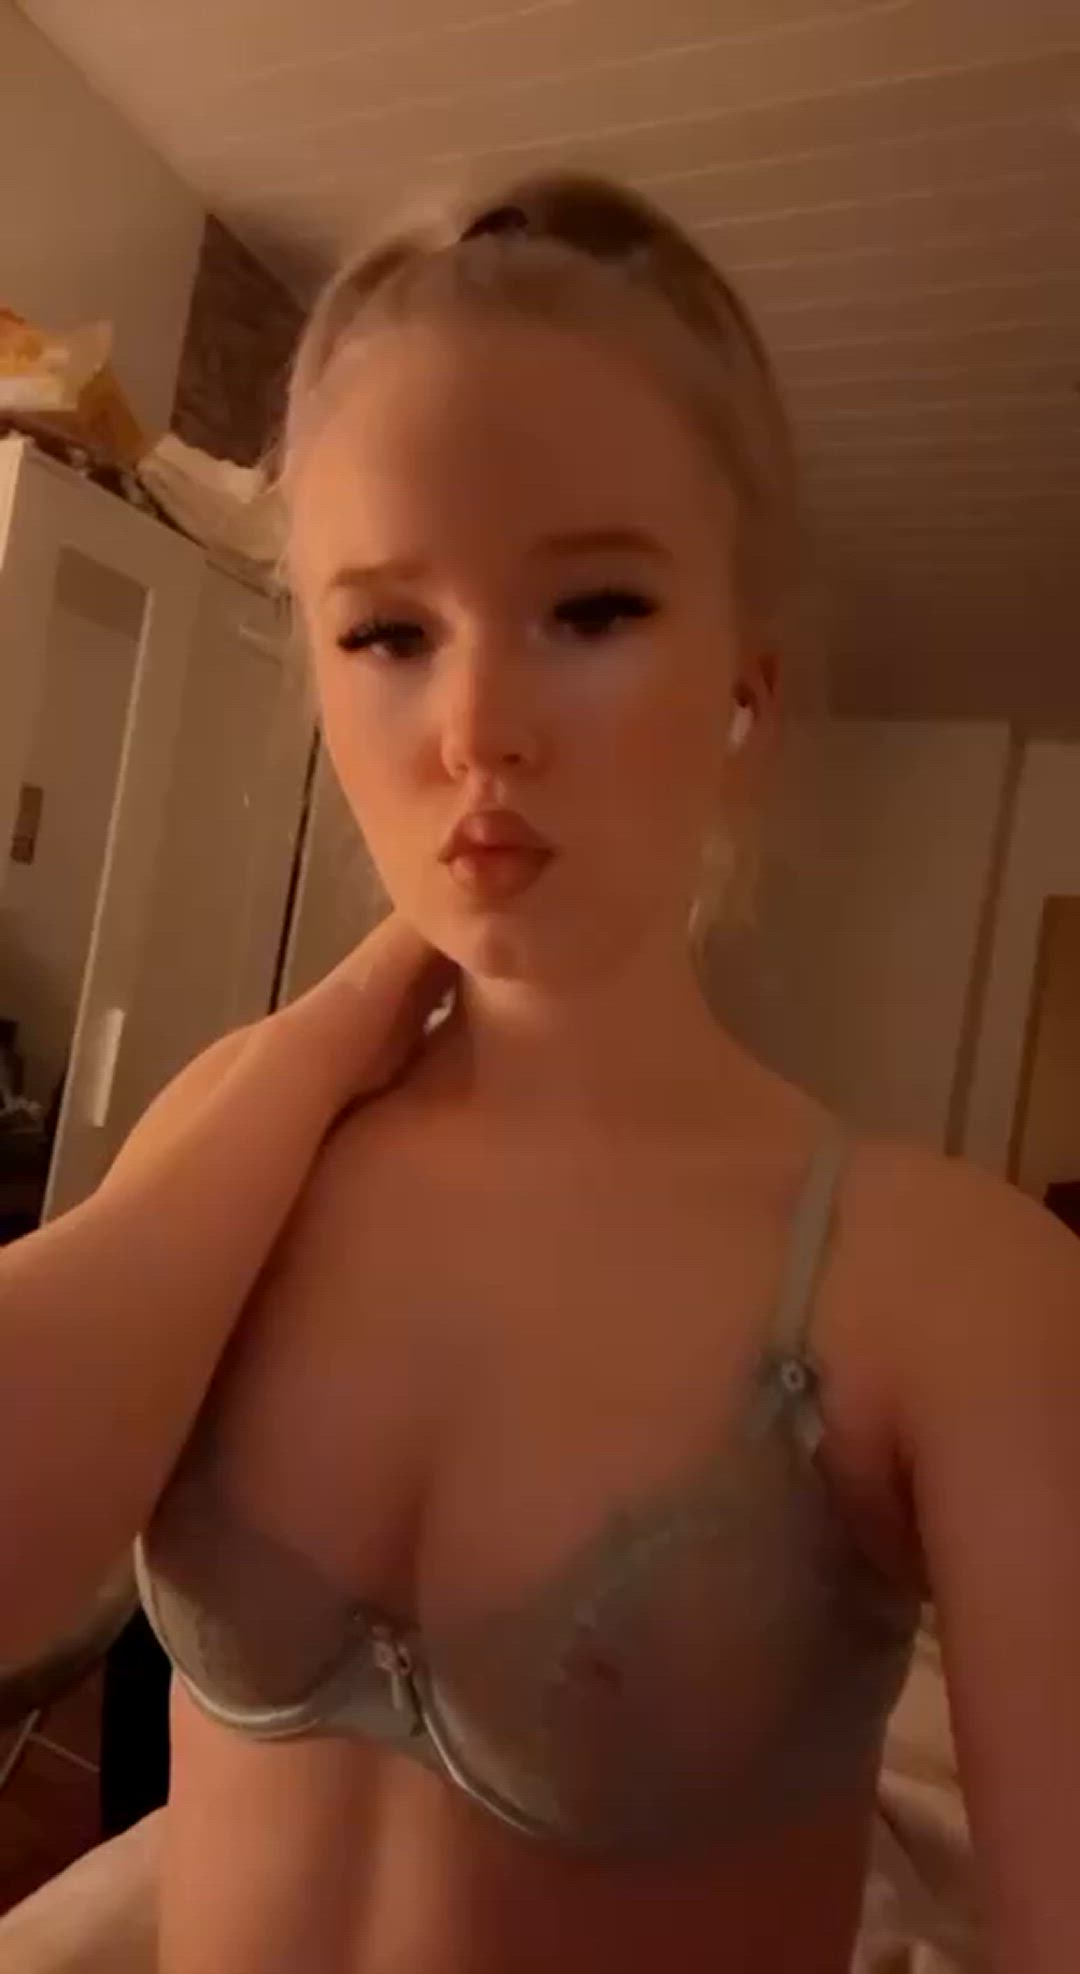 Ass porn video with onlyfans model josiexbaby <strong>@josibxbyy</strong>